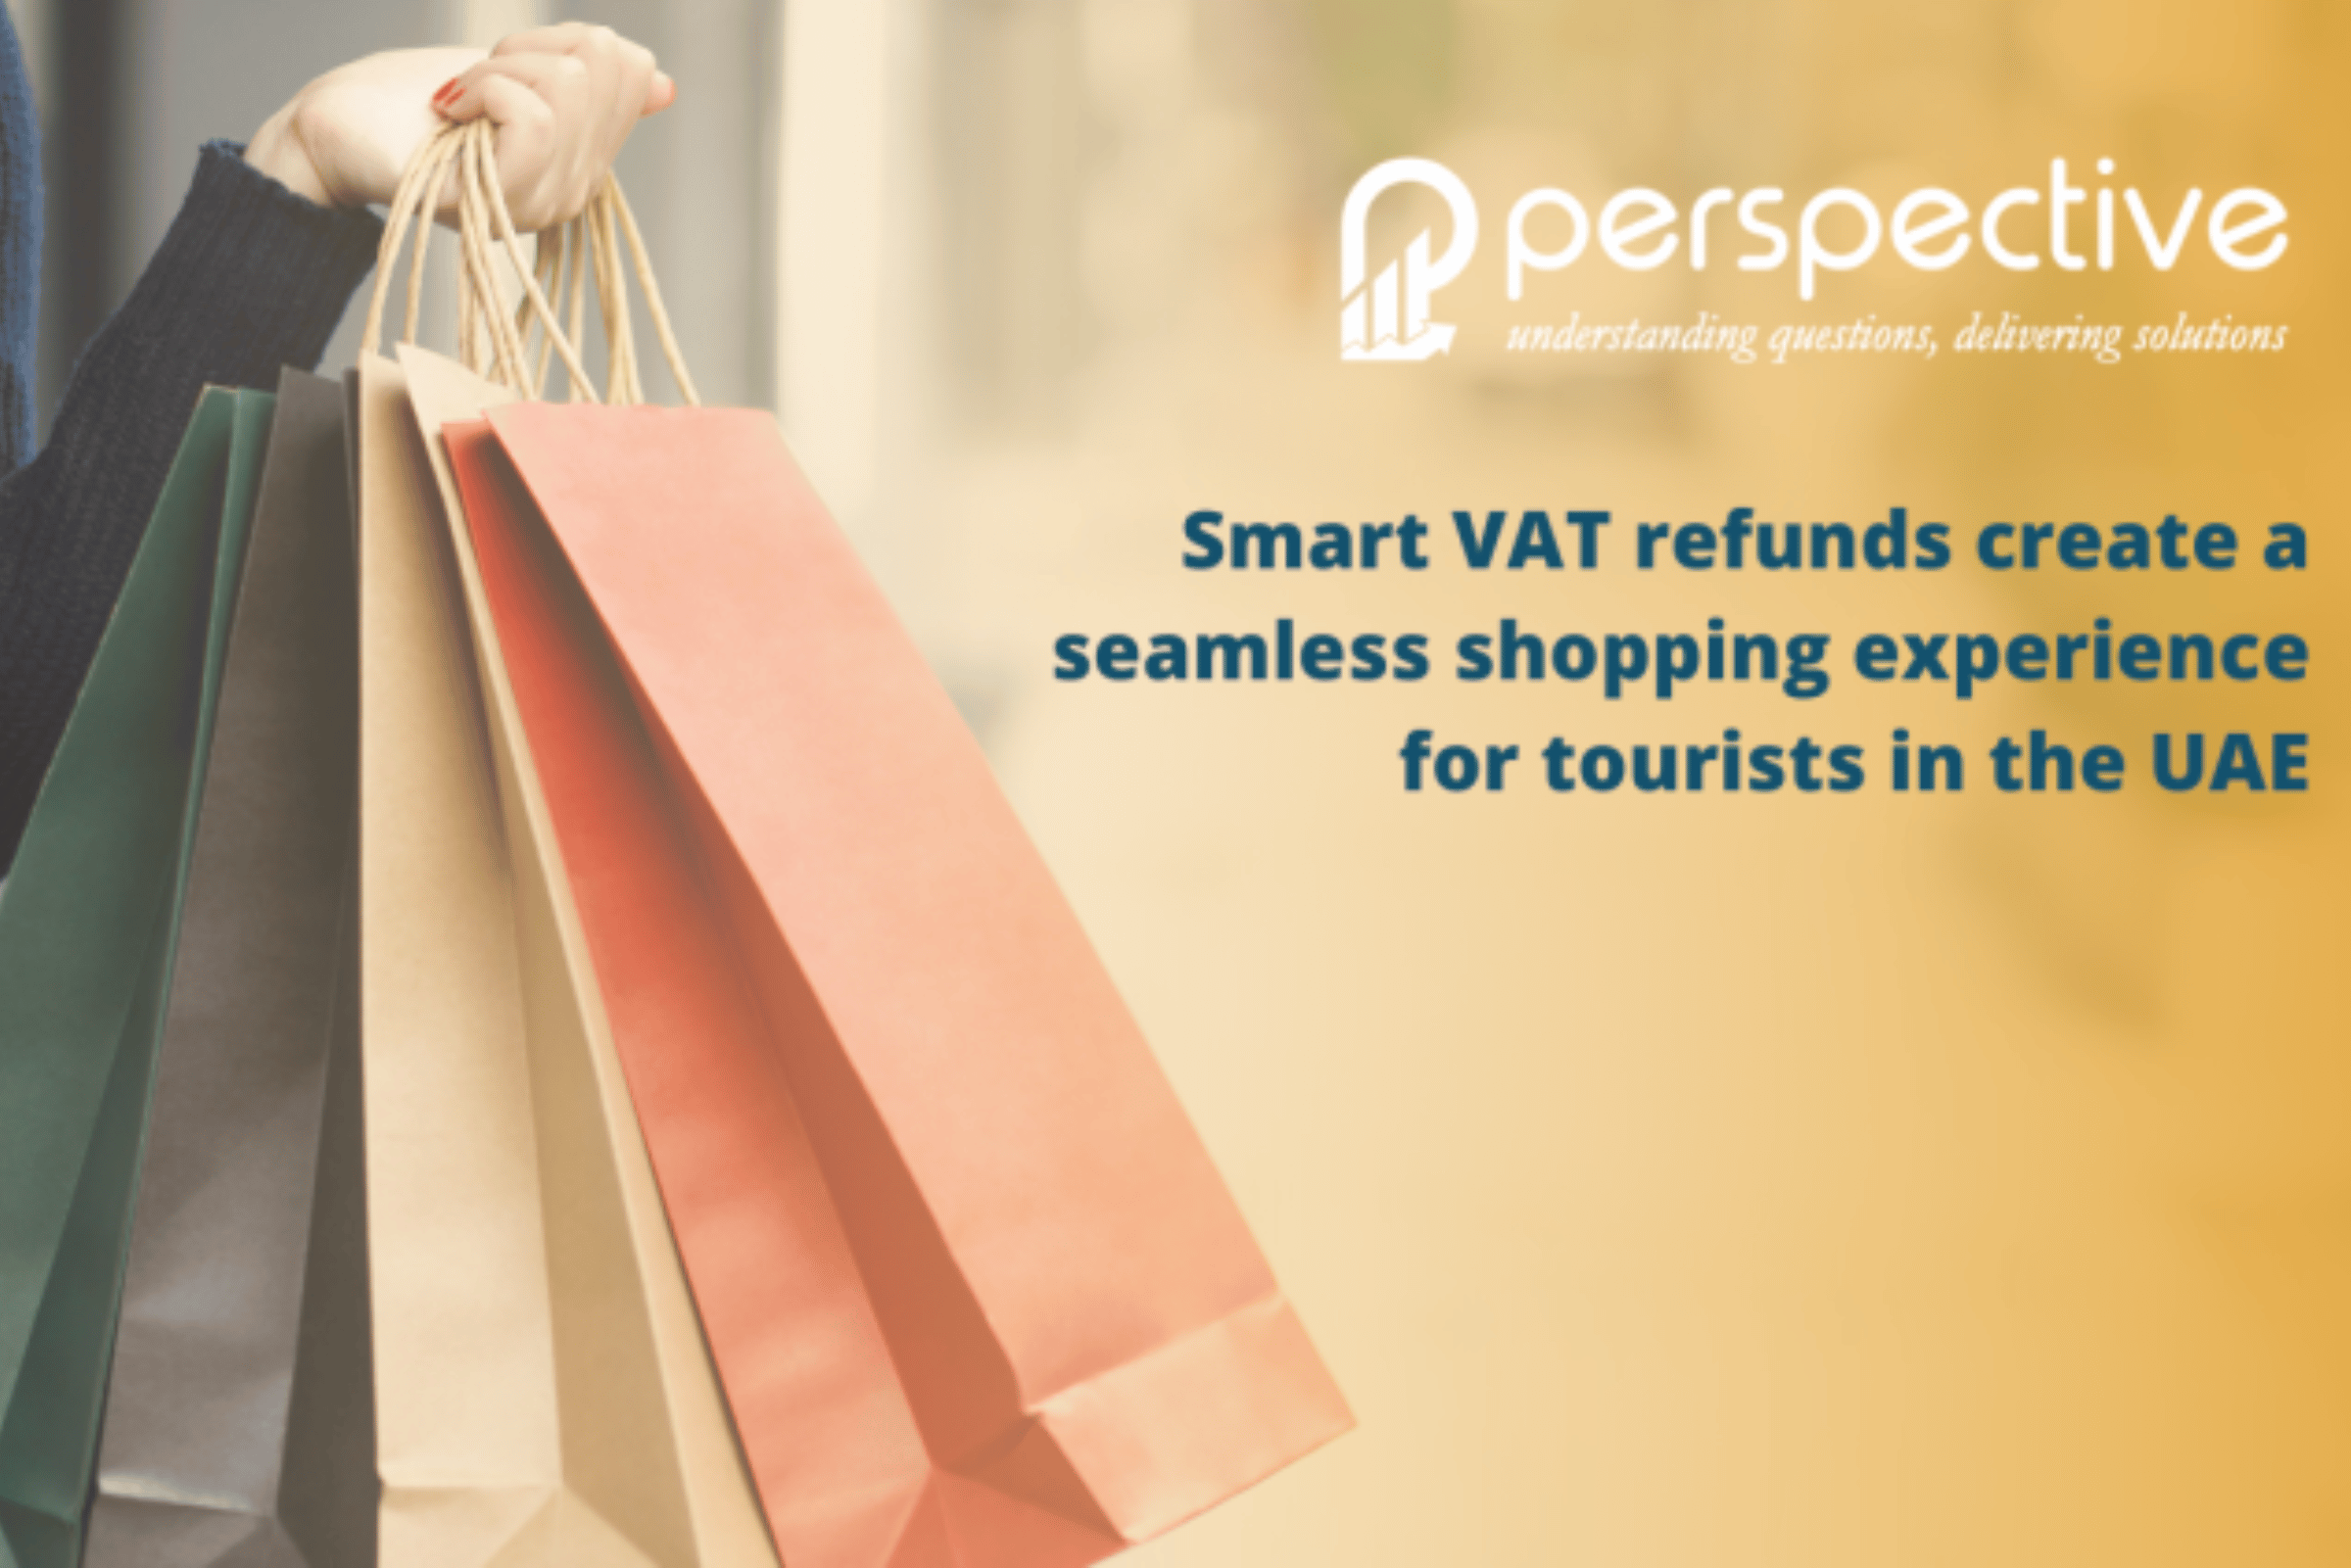 Smart VAT refunds create a seamless shopping experience for tourists in the UAE